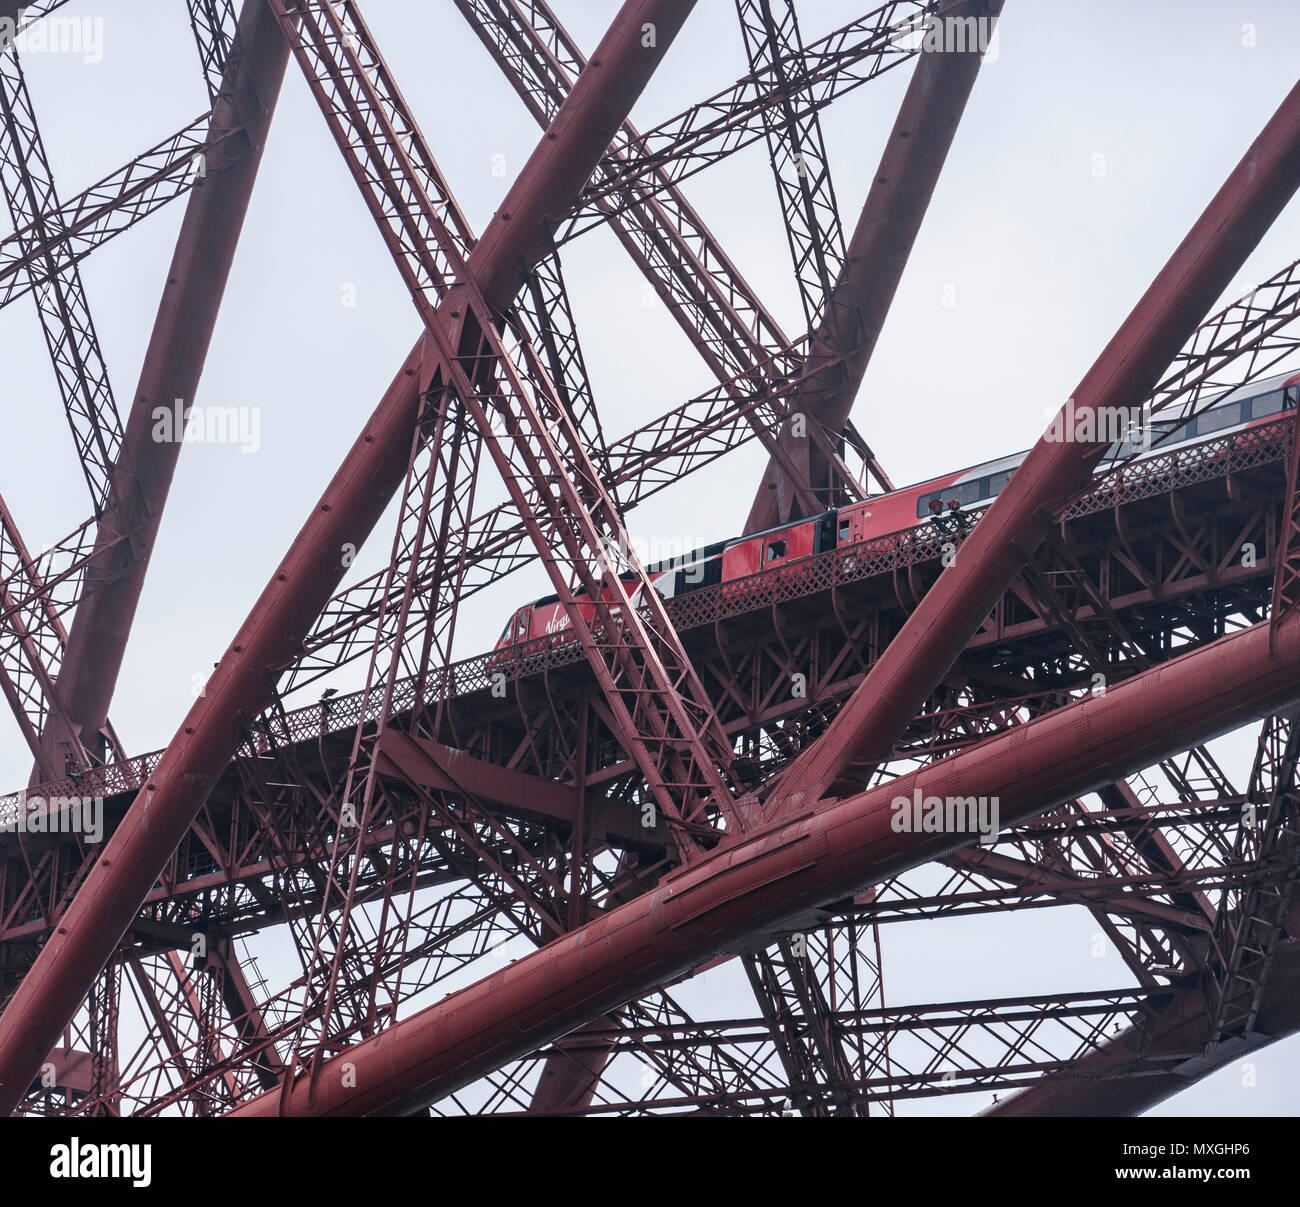 Virgin Trains go south - with the East Coast rail line franchise due to terminate on June 24th, one of the last Virgin trains heads south over the 128-yeat-old Forth Bridge - a study in red, like the Virgin-Stagecoach joint venture's accounts Stock Photo